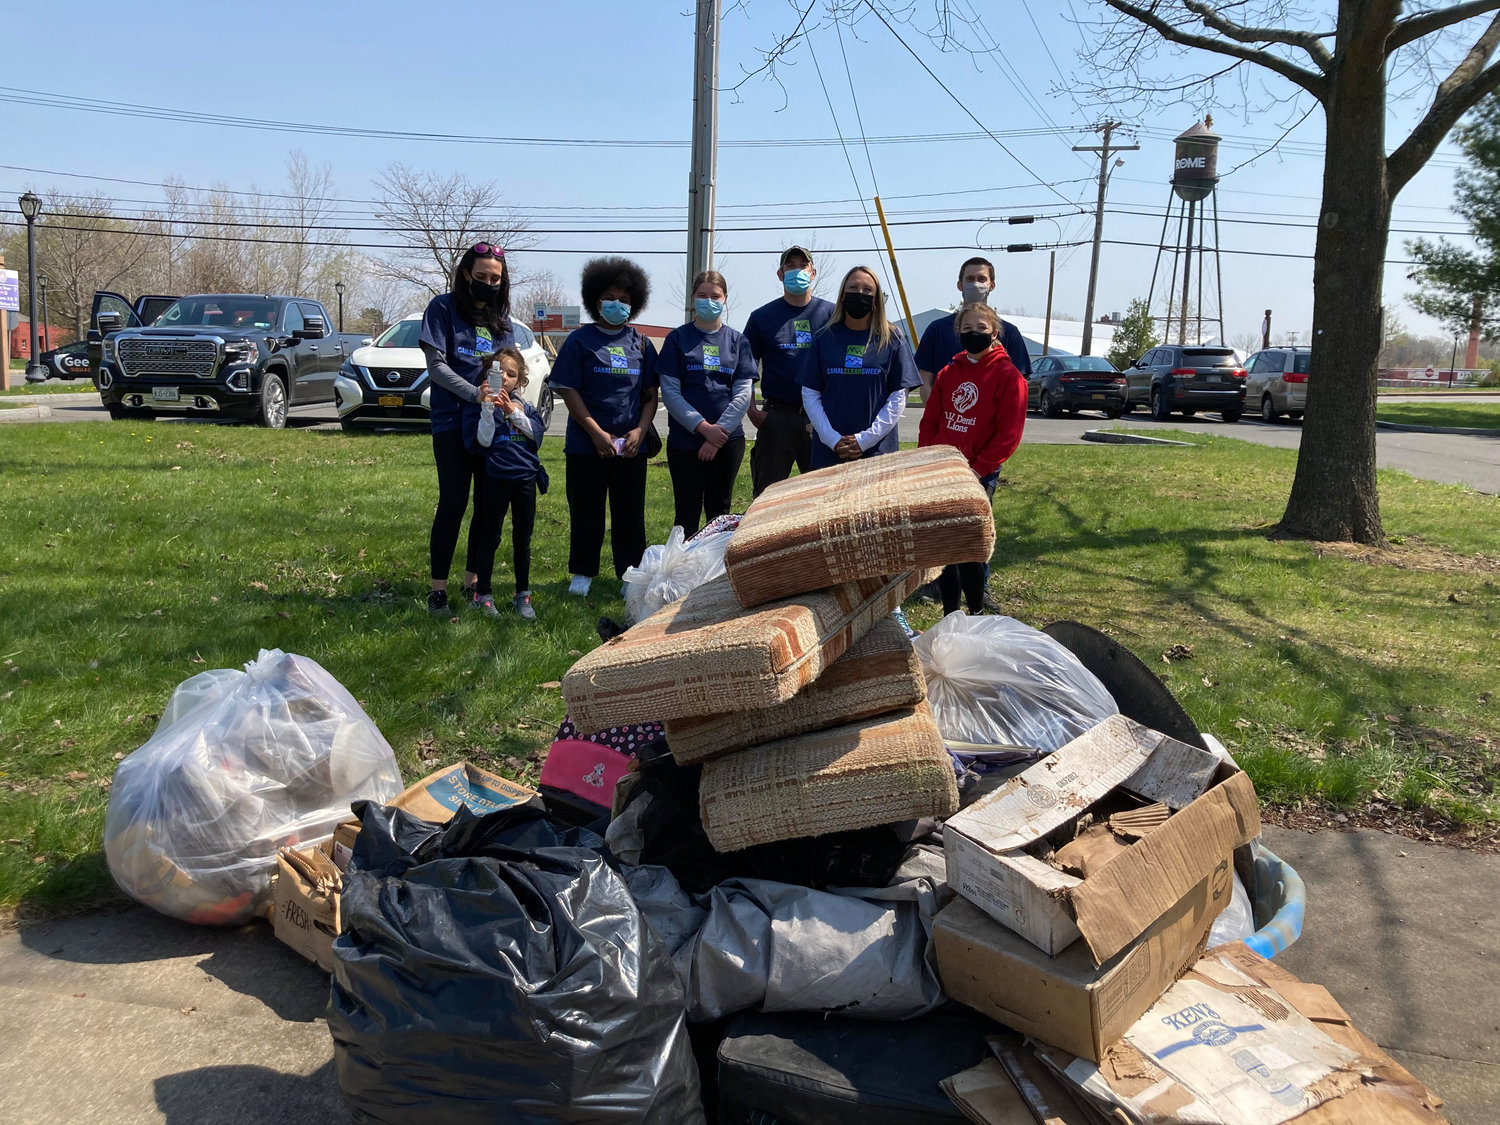 CANAL CLEAN SWEEP — Members of the Rome Free Academy Interact Club stand in front of a pile of rubbish collected during a past Earth Day cleanup around Bellamy Harbor Park in this file photo. Members of the group and the Rome Rotary Club will partner for a Canal Clean Sweeo from 1-4 p.m. Friday, April 24.